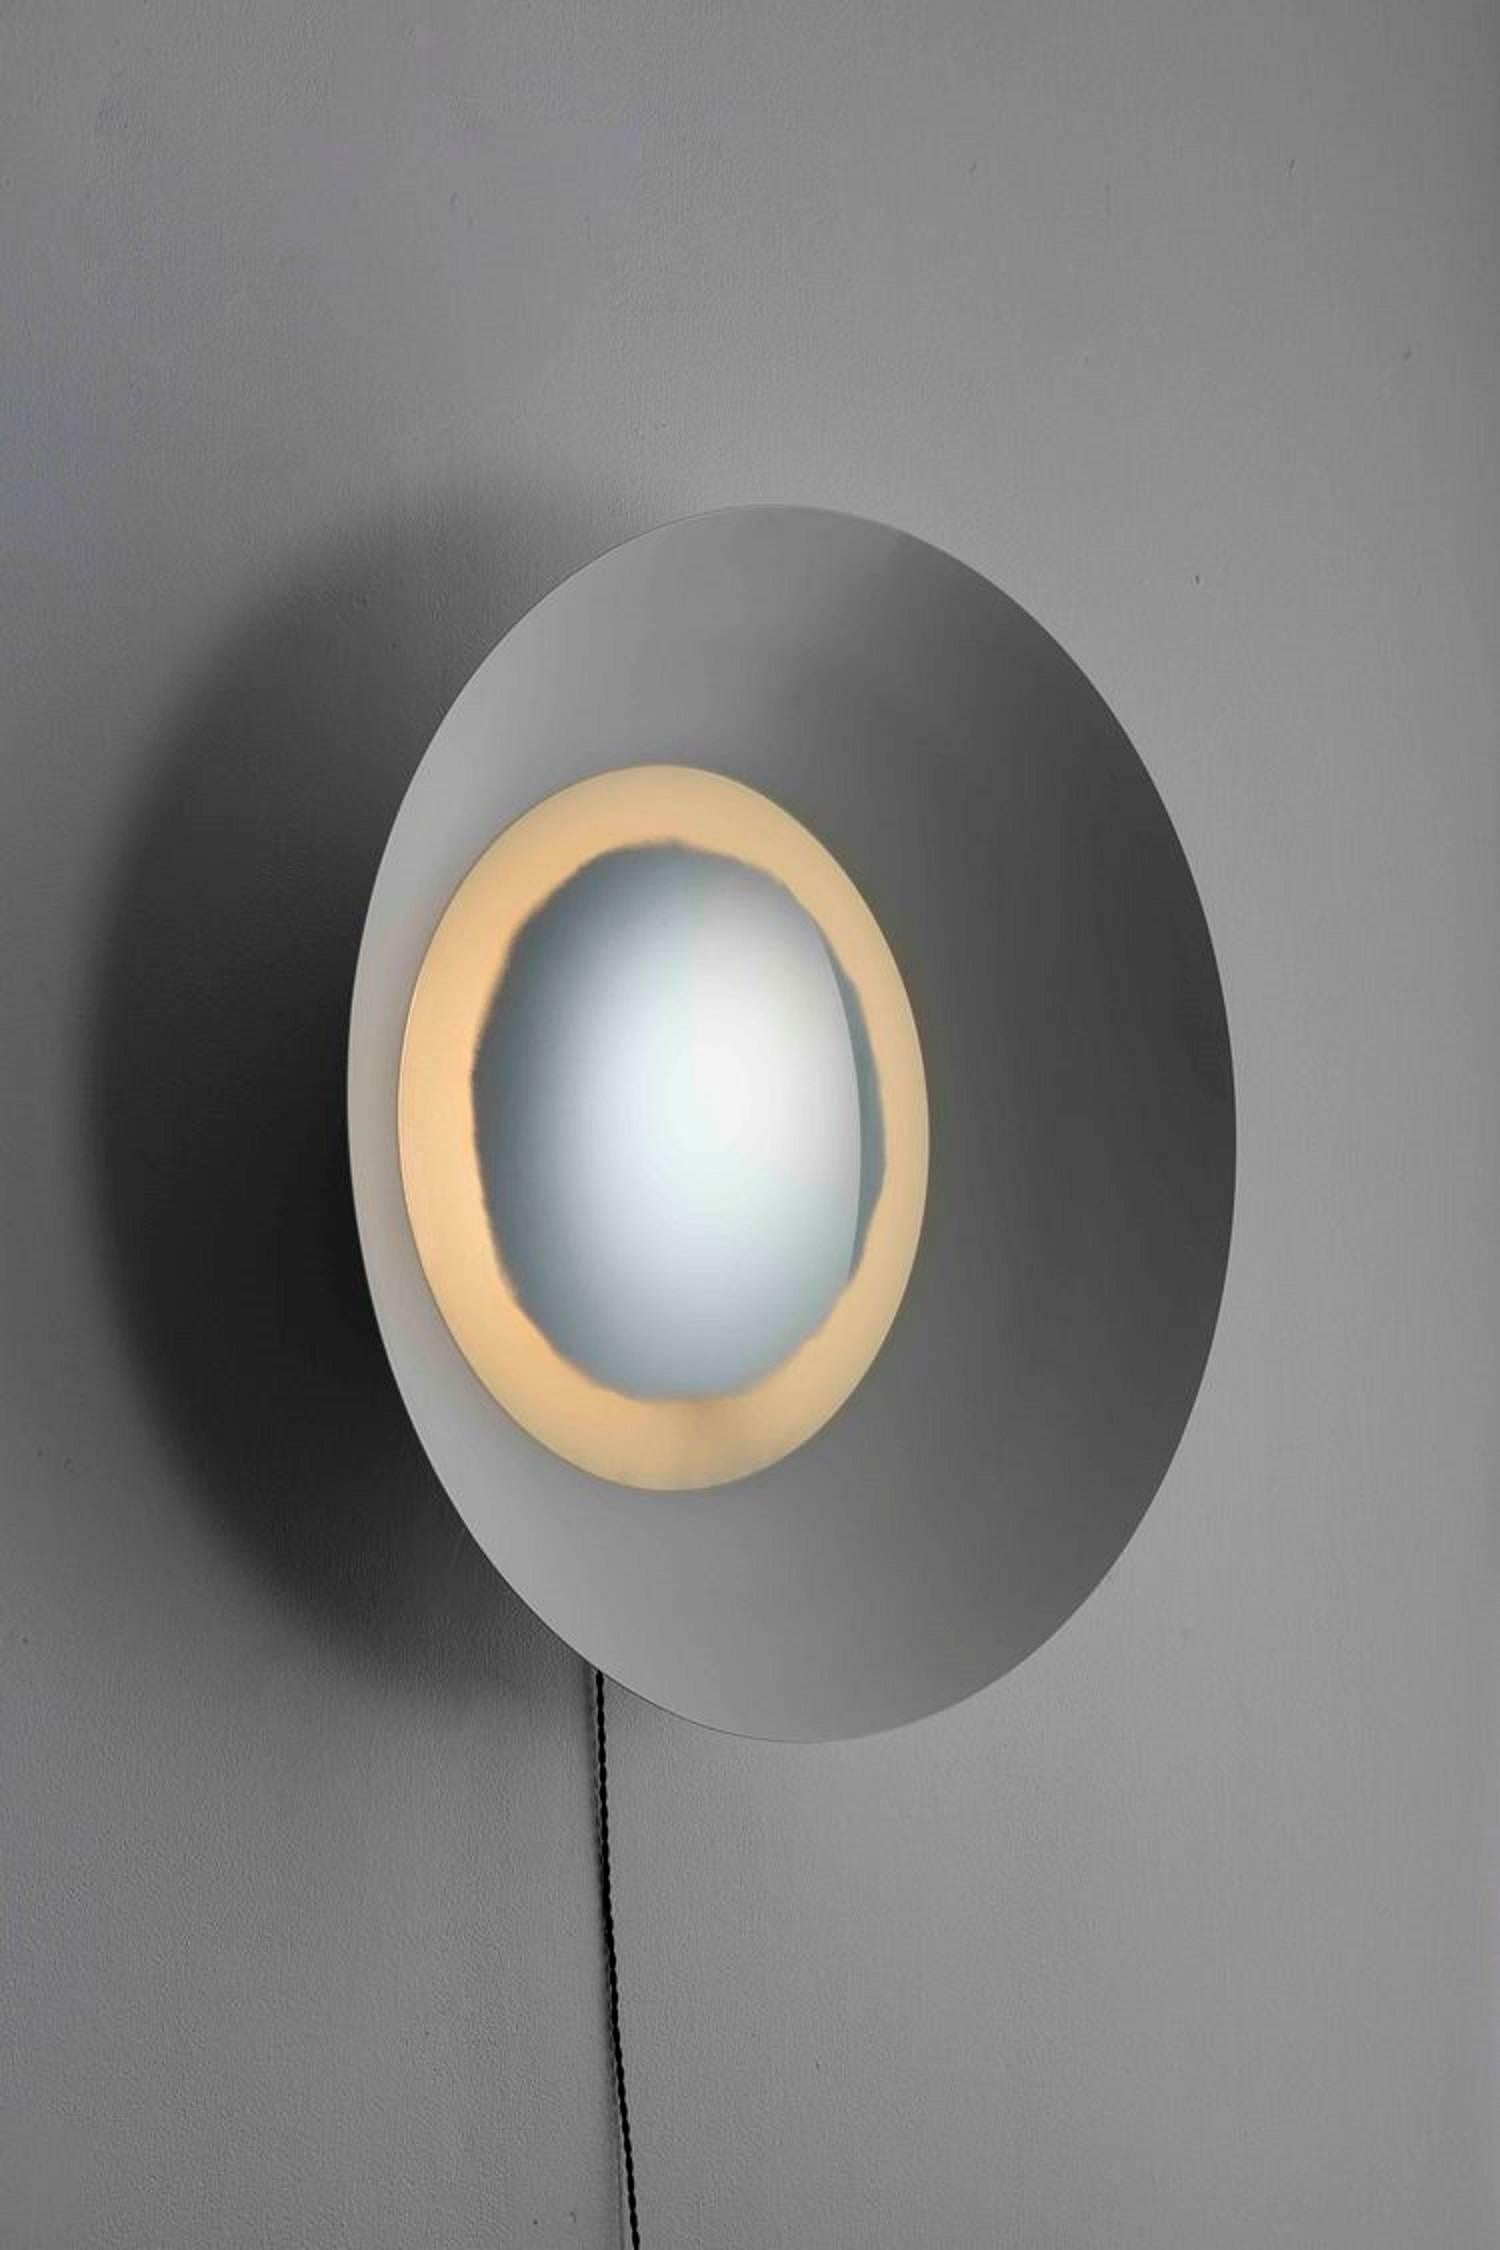 Curved Light Wall Sconce - Powdercoated (amerikanisch) im Angebot